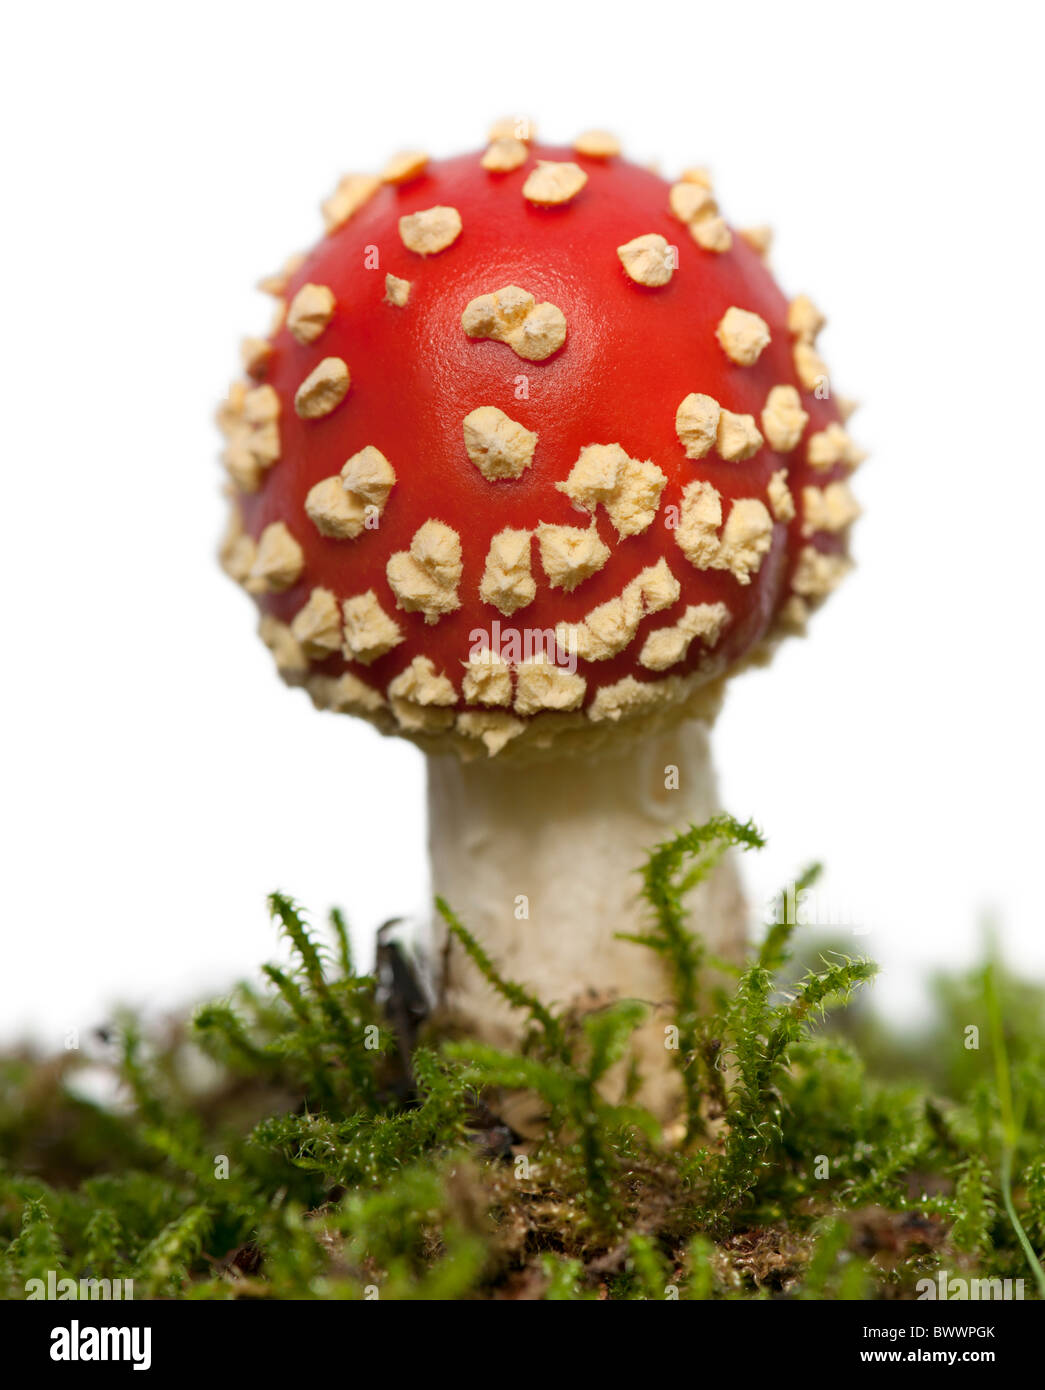 Fly Fly agaric ou Amanita champignons, Amanita muscaria, in front of white background Banque D'Images